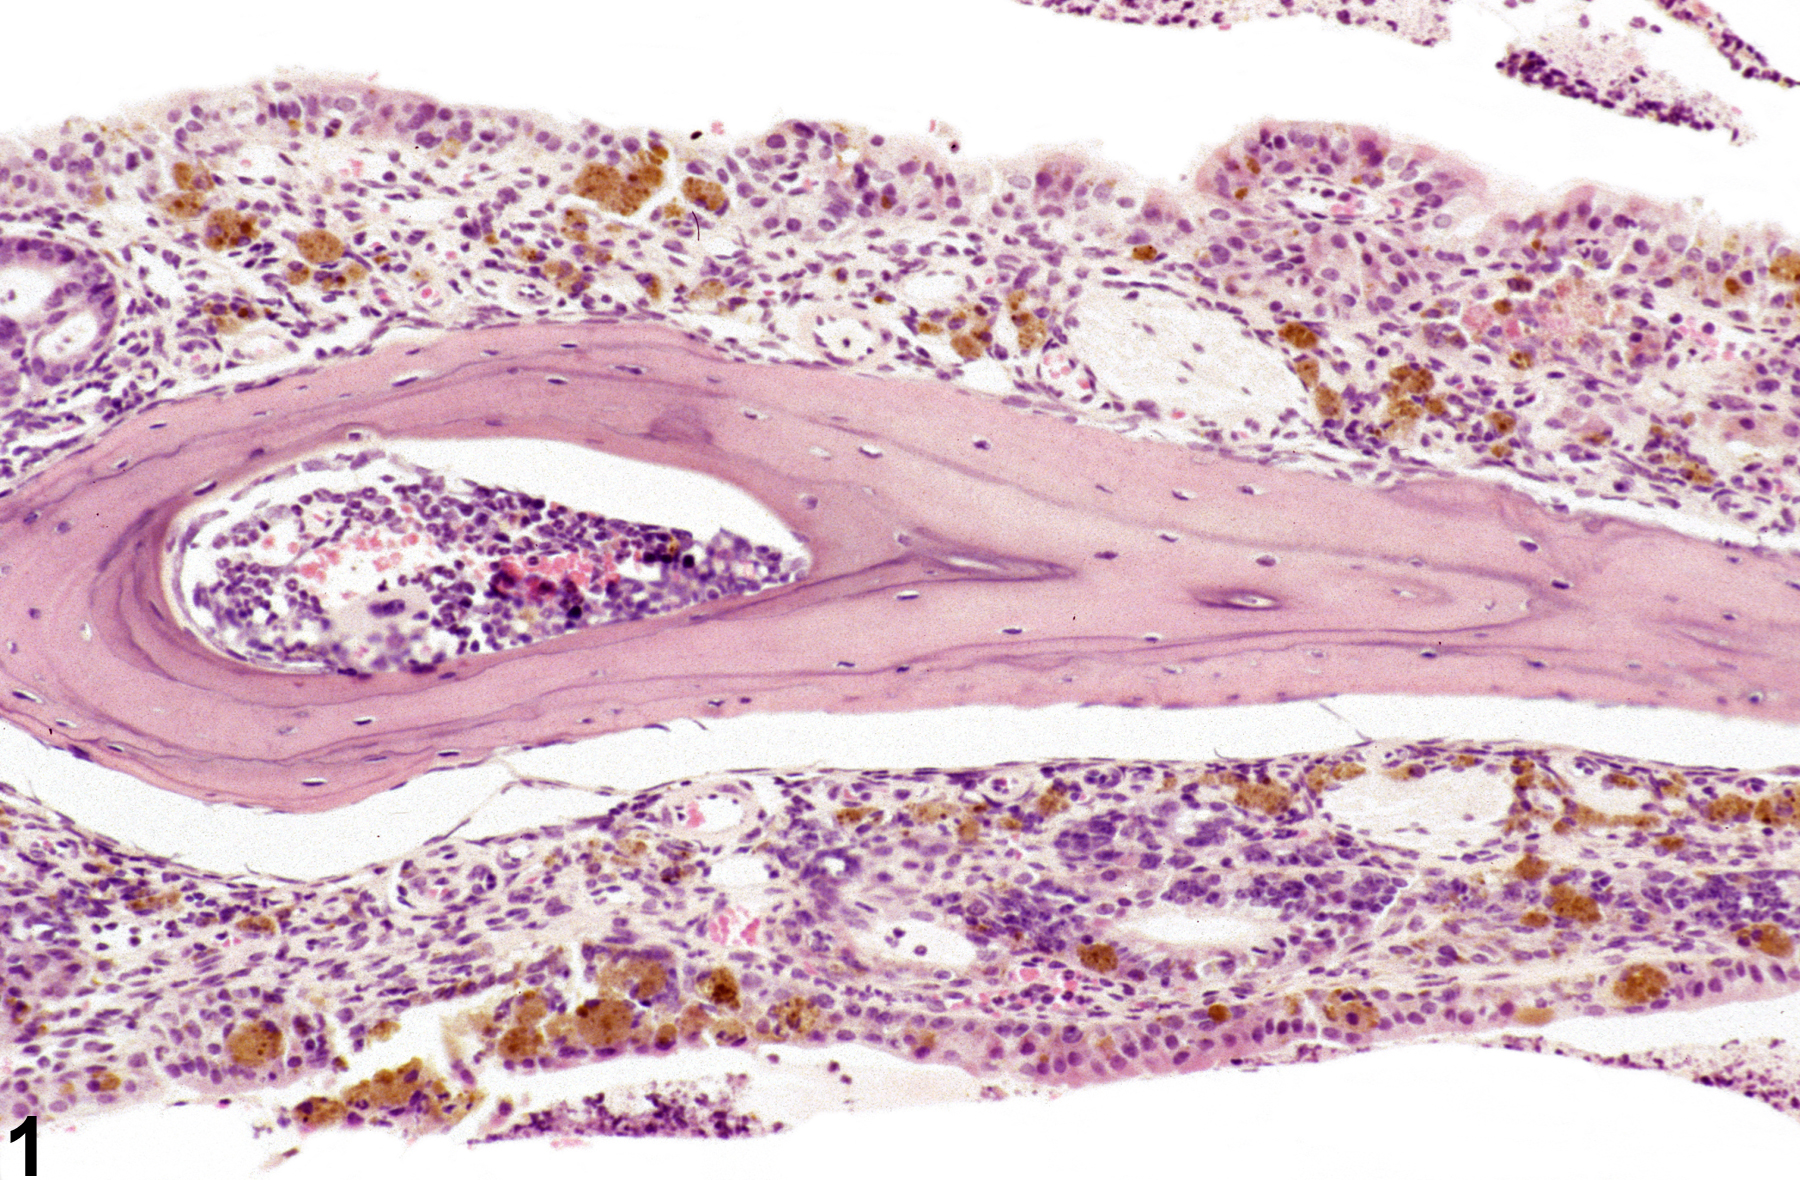 Image of pigment in the nose, respiratory epithelium from a female B6C3F1/N mouse in a subchronic study